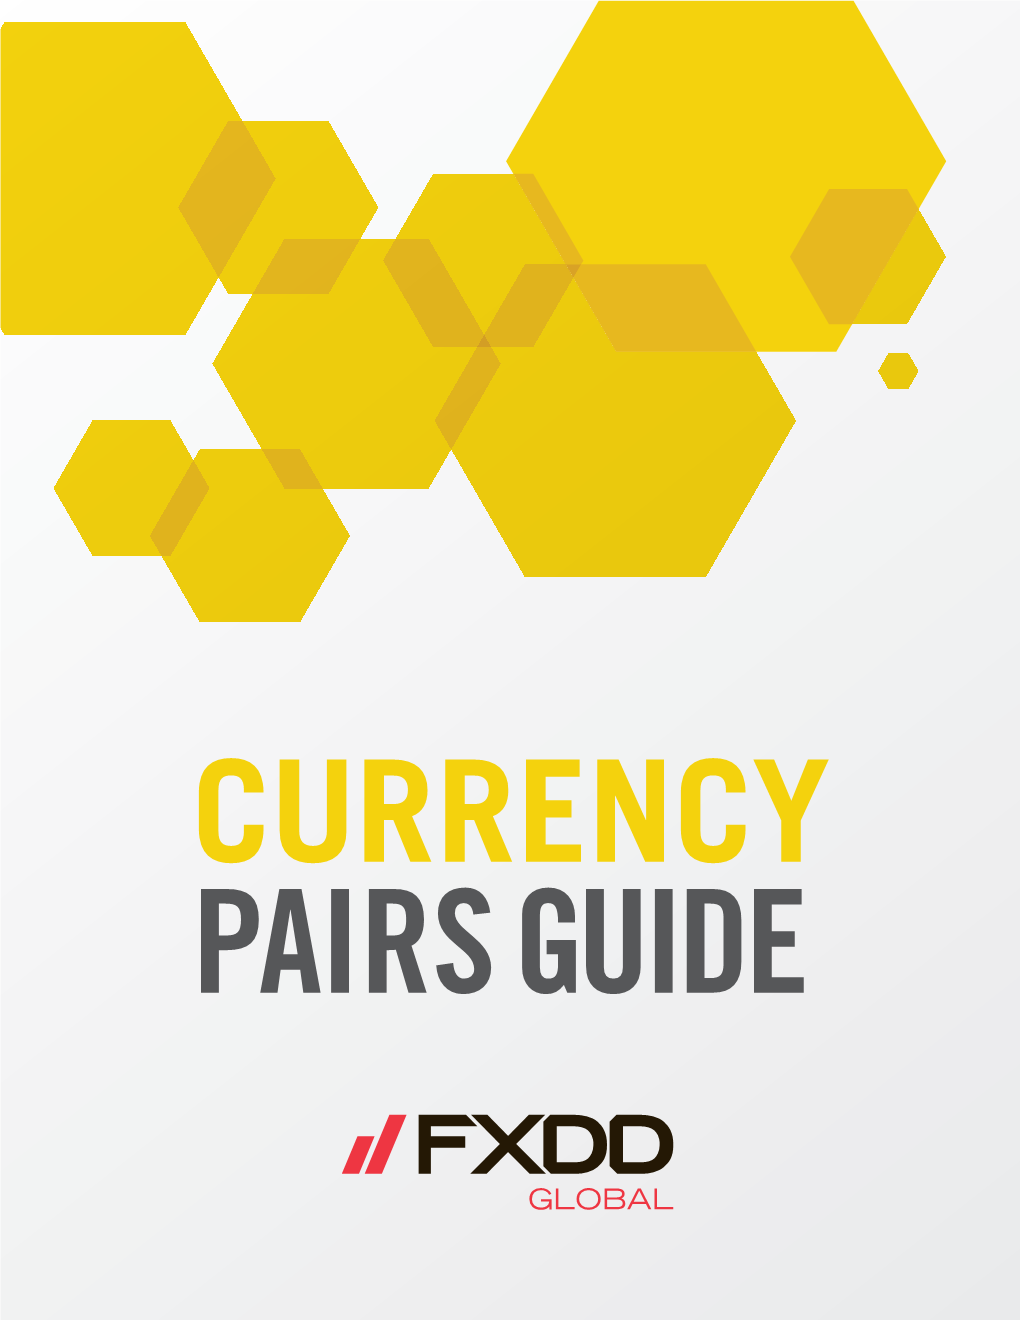 Currencypairguide.Pdf